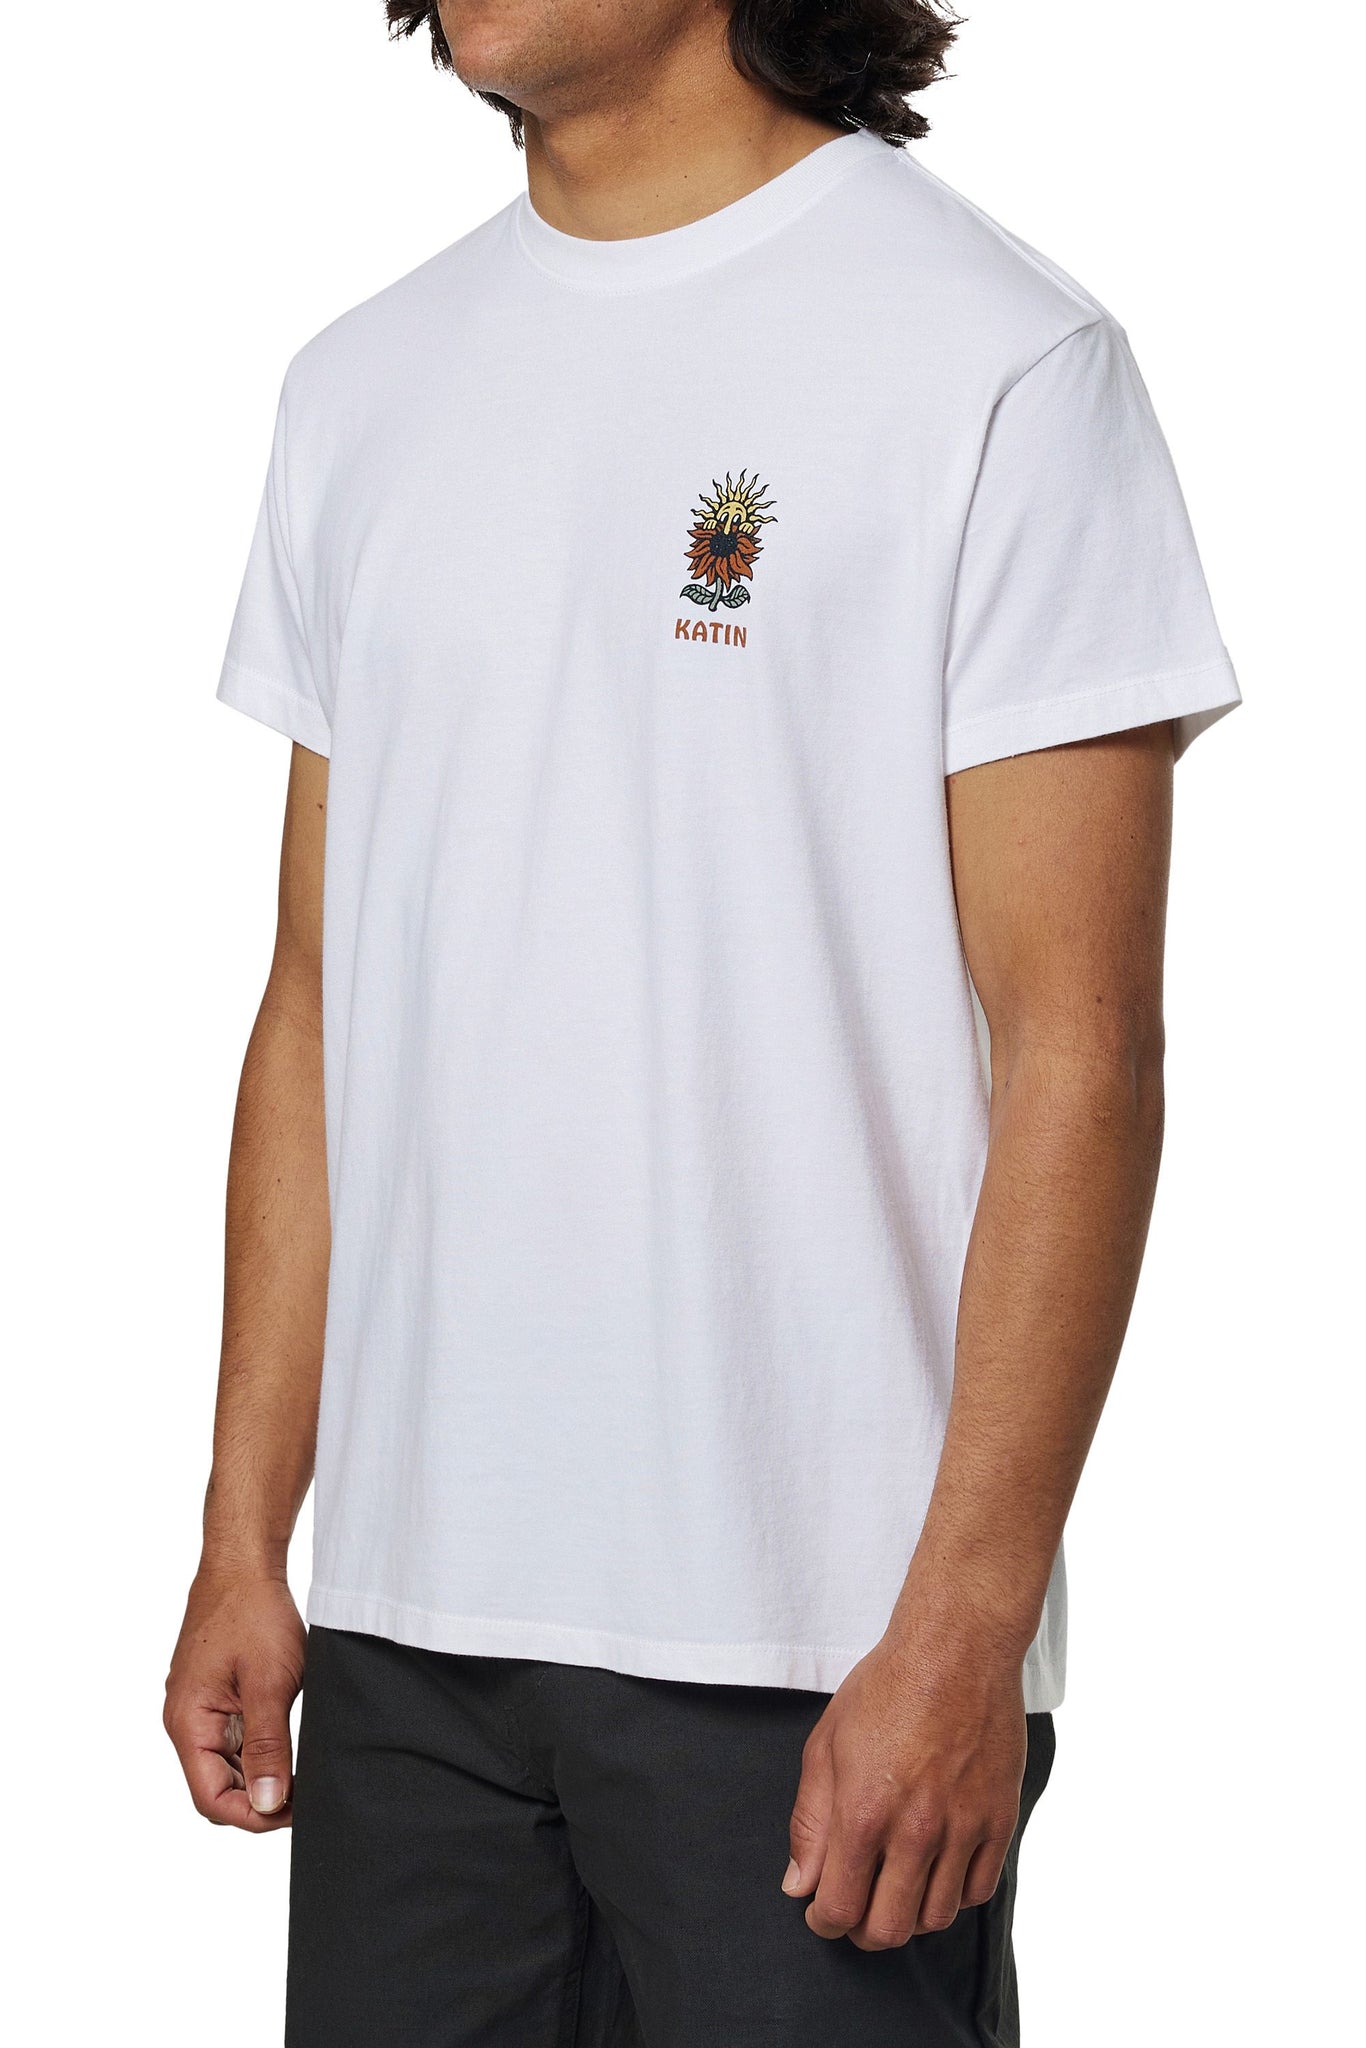 Katin USA - Pollen Tee - all things being eco chilliwack canada - men's organic cotton clothing and accessories store - men's fashion